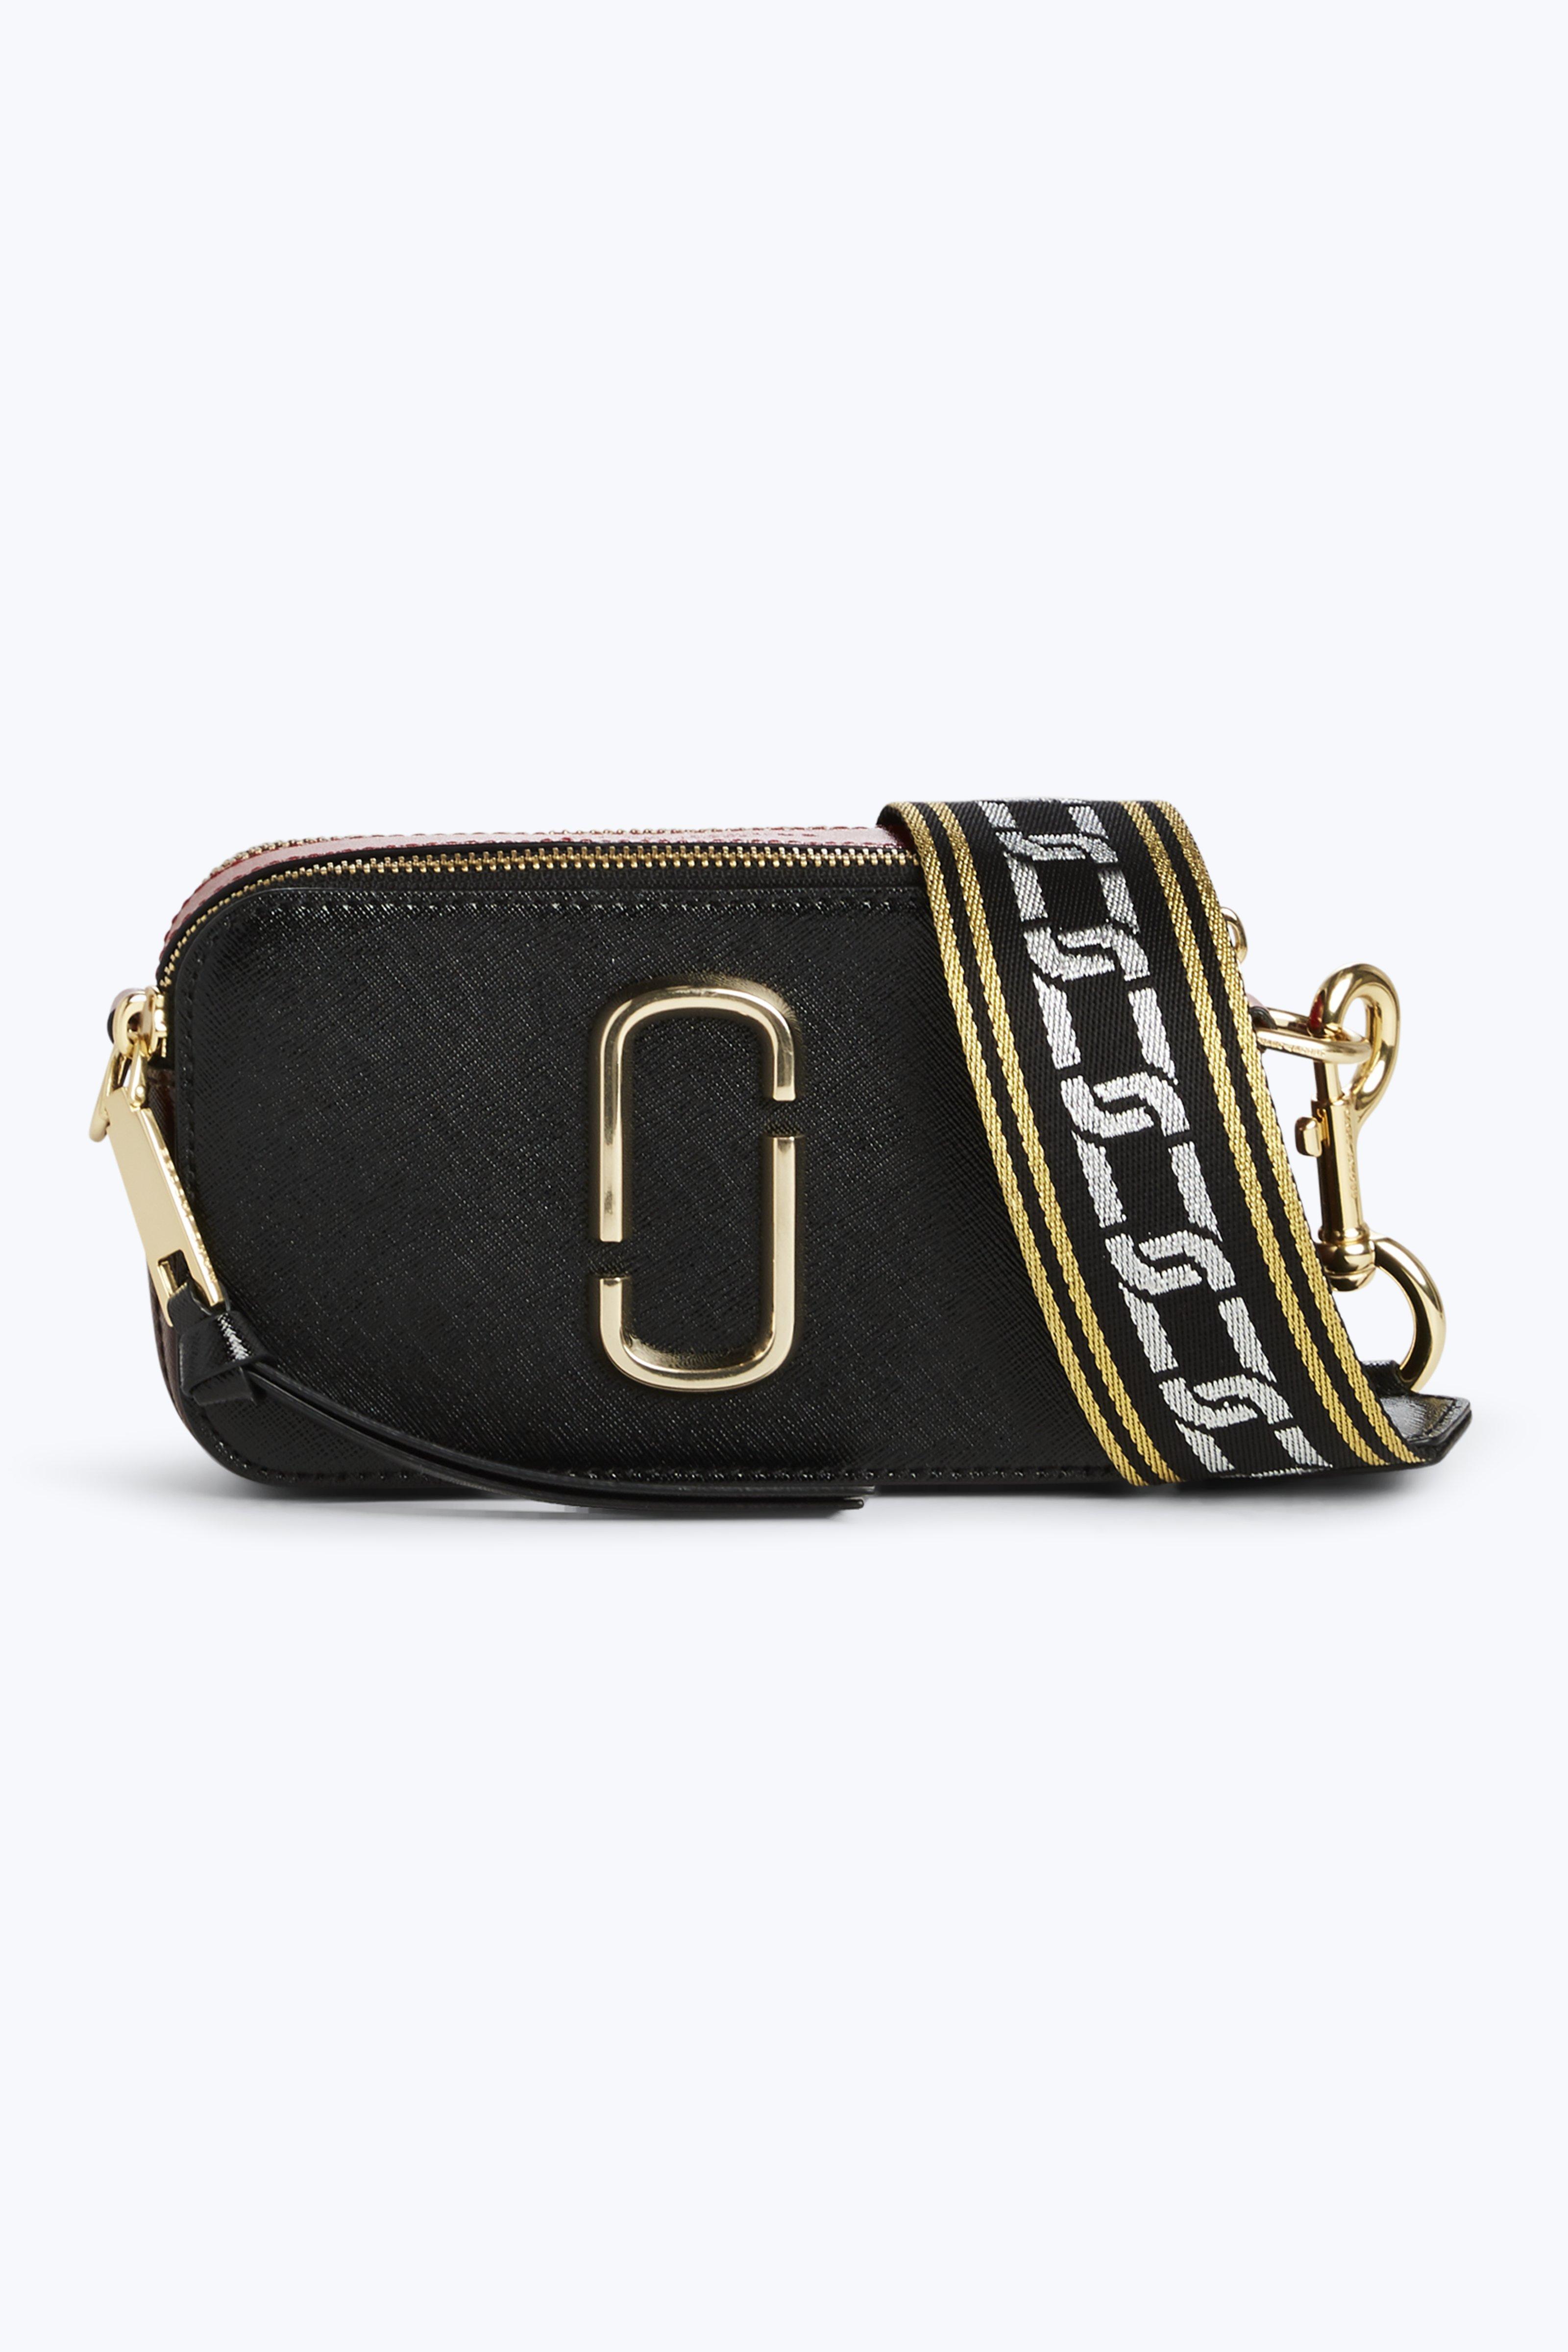 Lyst - Marc Jacobs Snapshot Small Camera Bag in Black